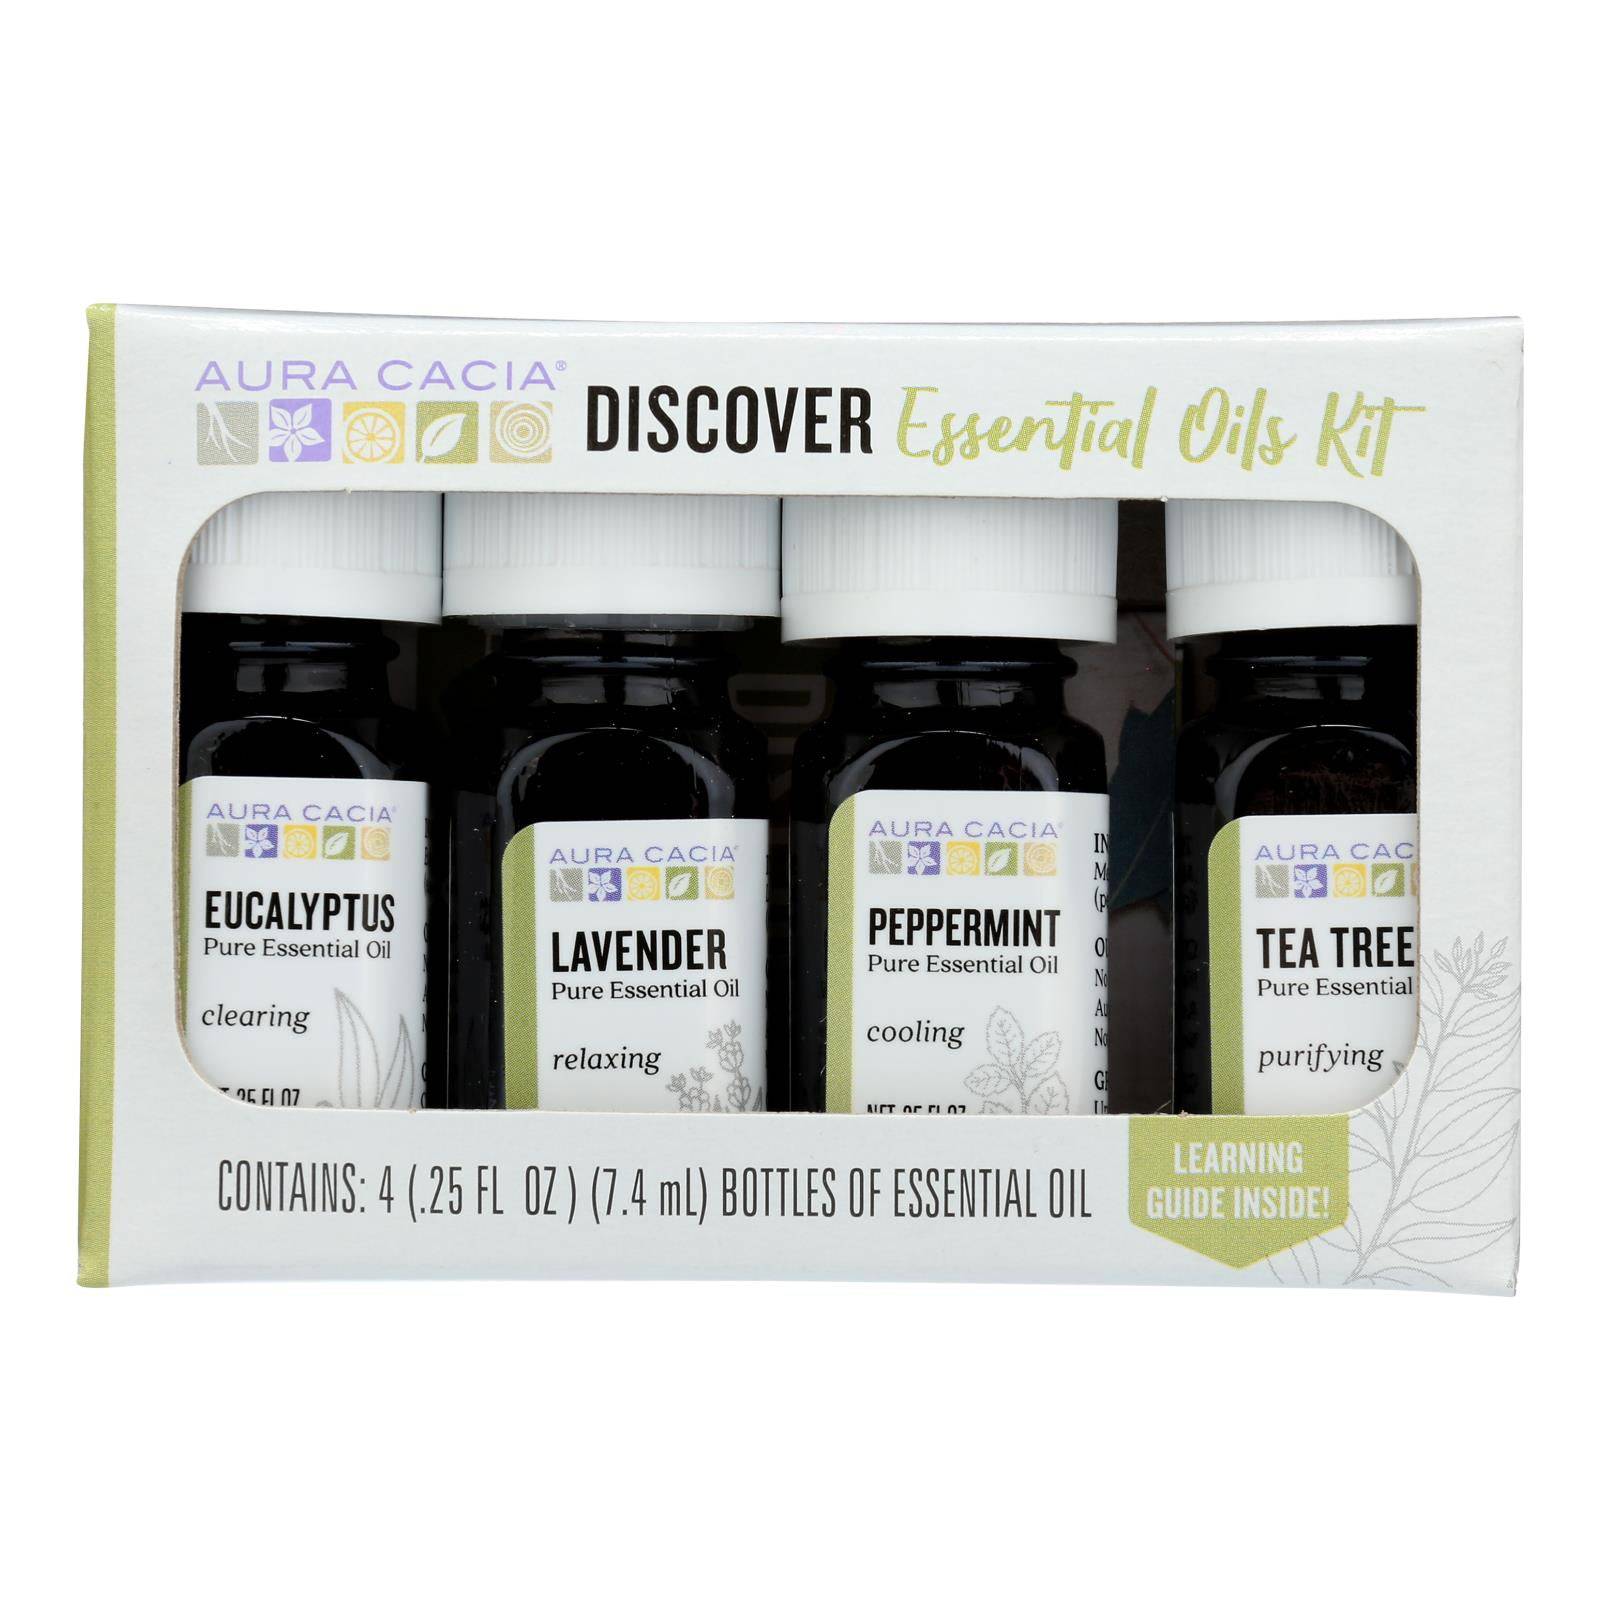 Buy Aura Cacia - Essential Oil - Discovery Kit - 0.25 Fl Oz.  at OnlyNaturals.us